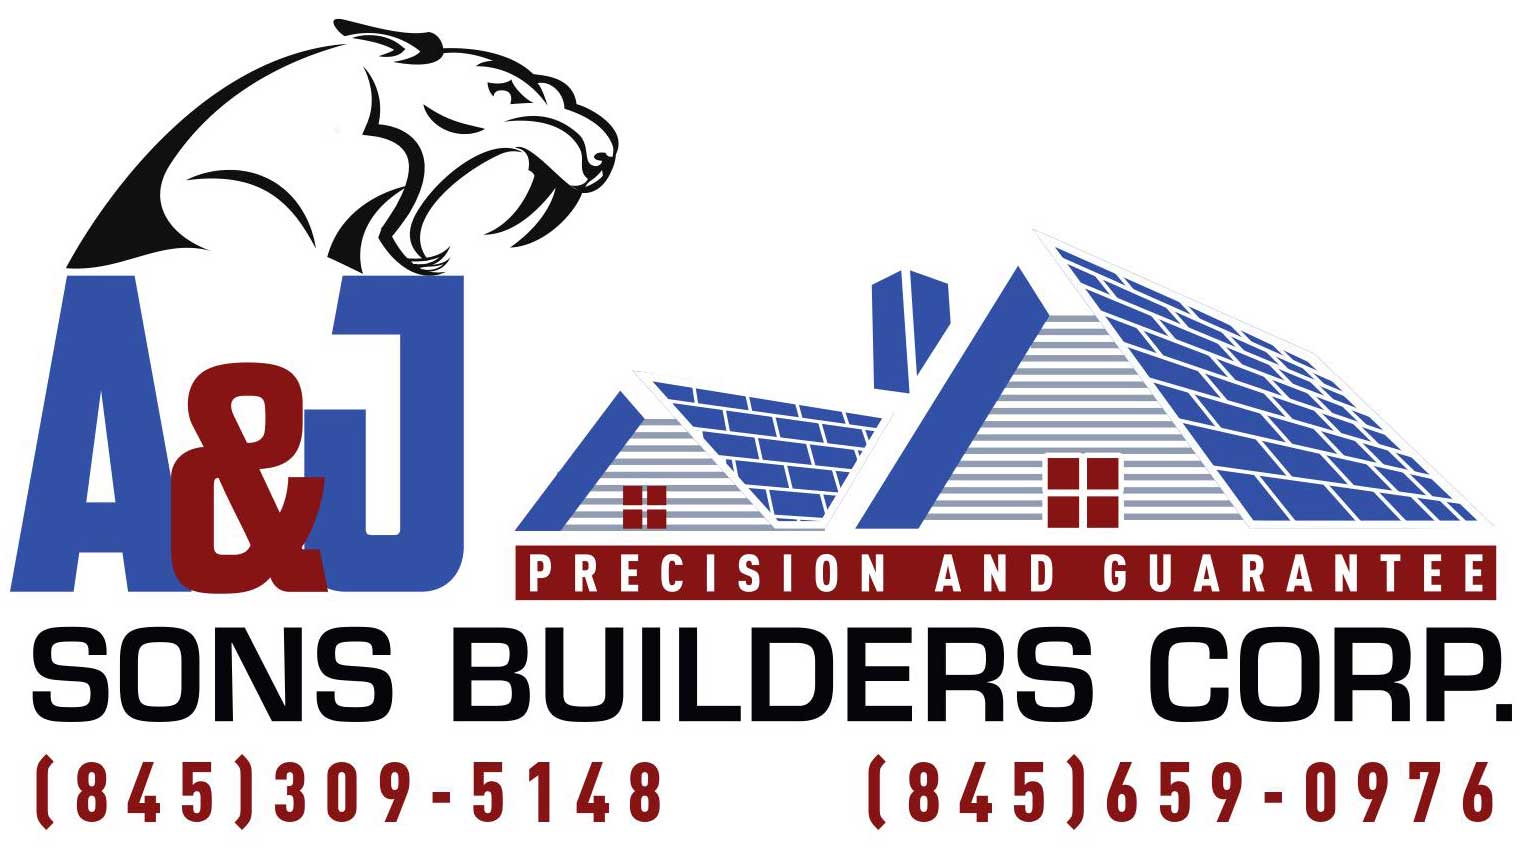 A & J Sons Builders Corp